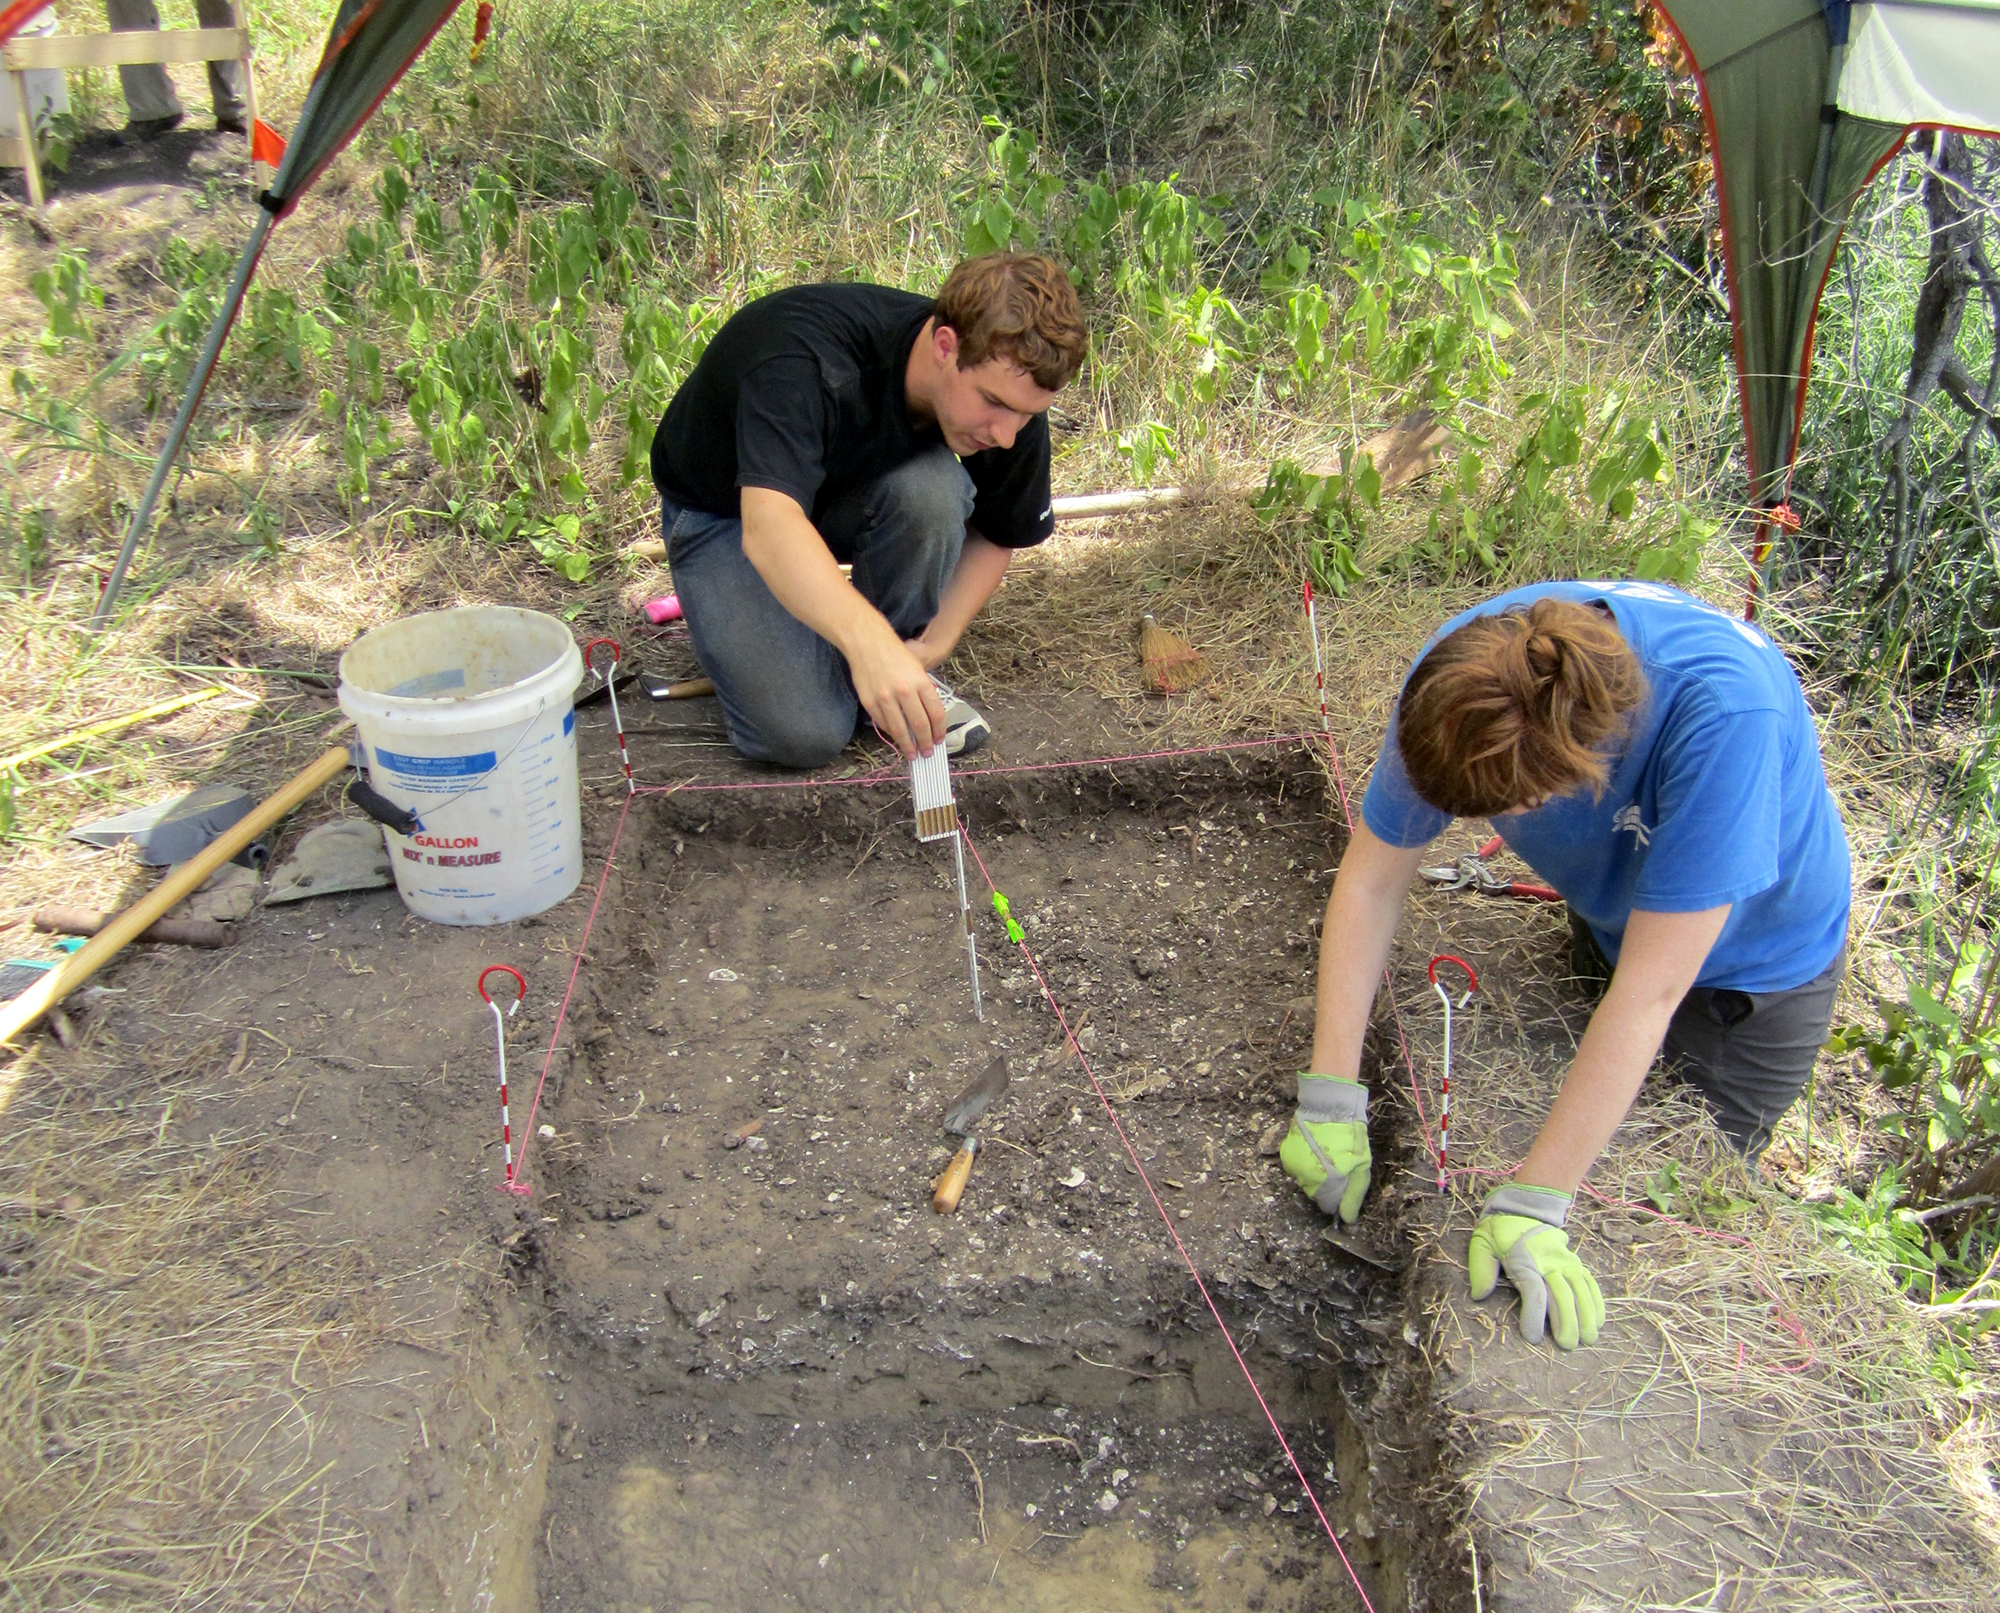 Members of the research team, Sean McCanty and Courtney Hofman, excavate an ancient oyster shell midden at the Smithsonian Environmental Research Center in Edgewater, Md.